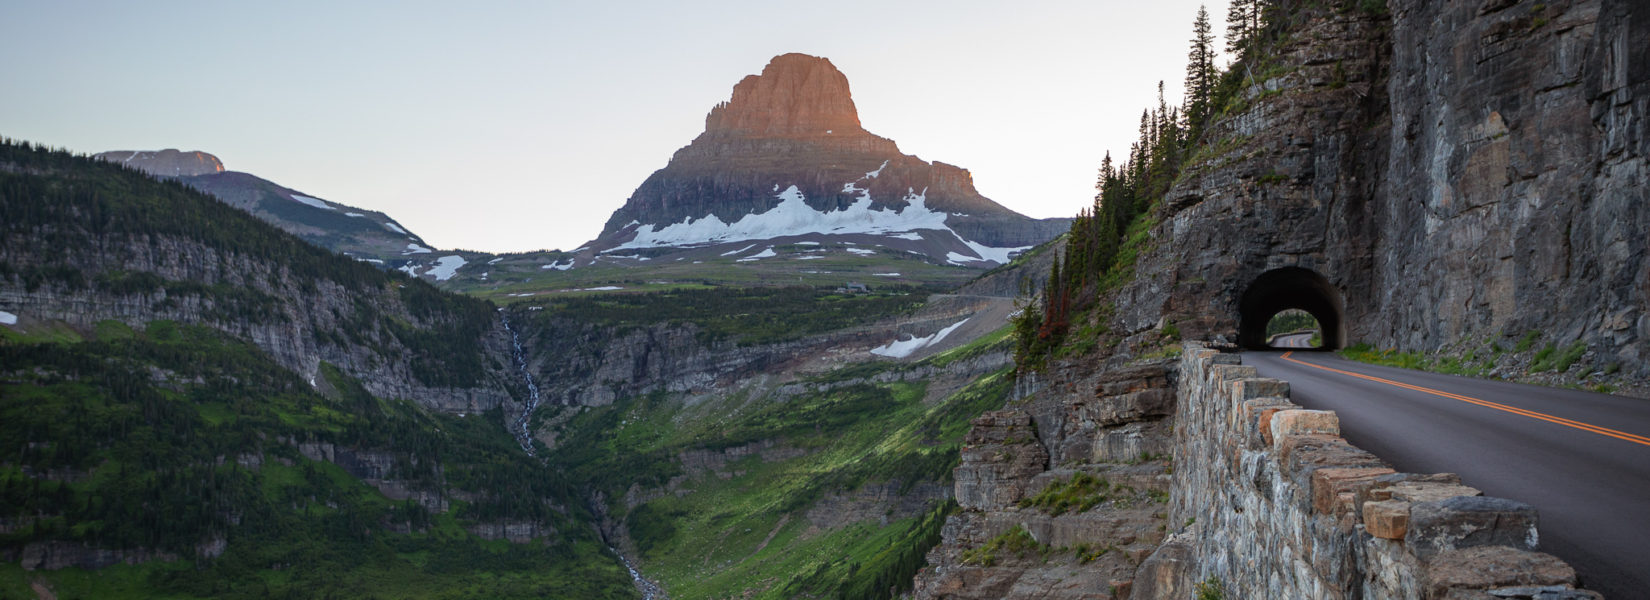 Driving the Going-to-the-Sun Road in Glacier National Park